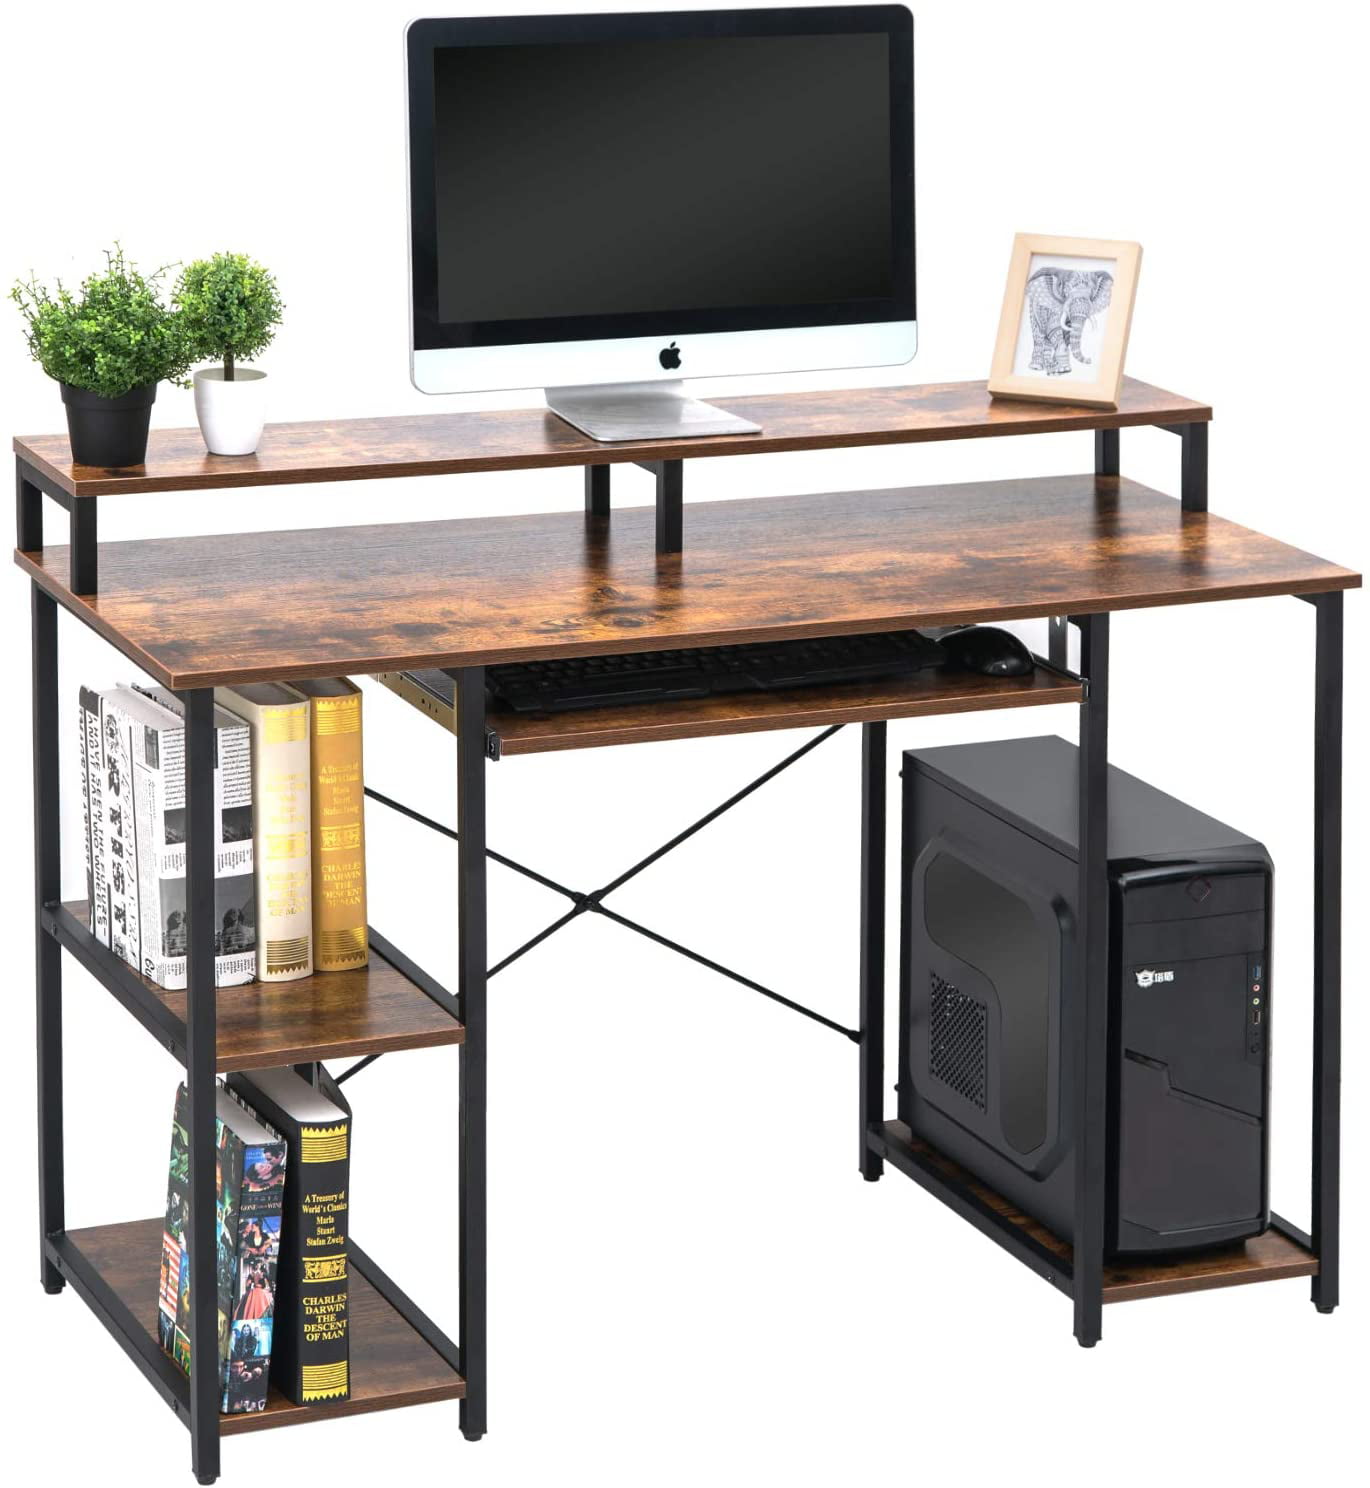 TOPSKY Computer Desk with Storage Shelves/Keyboard Tray ...